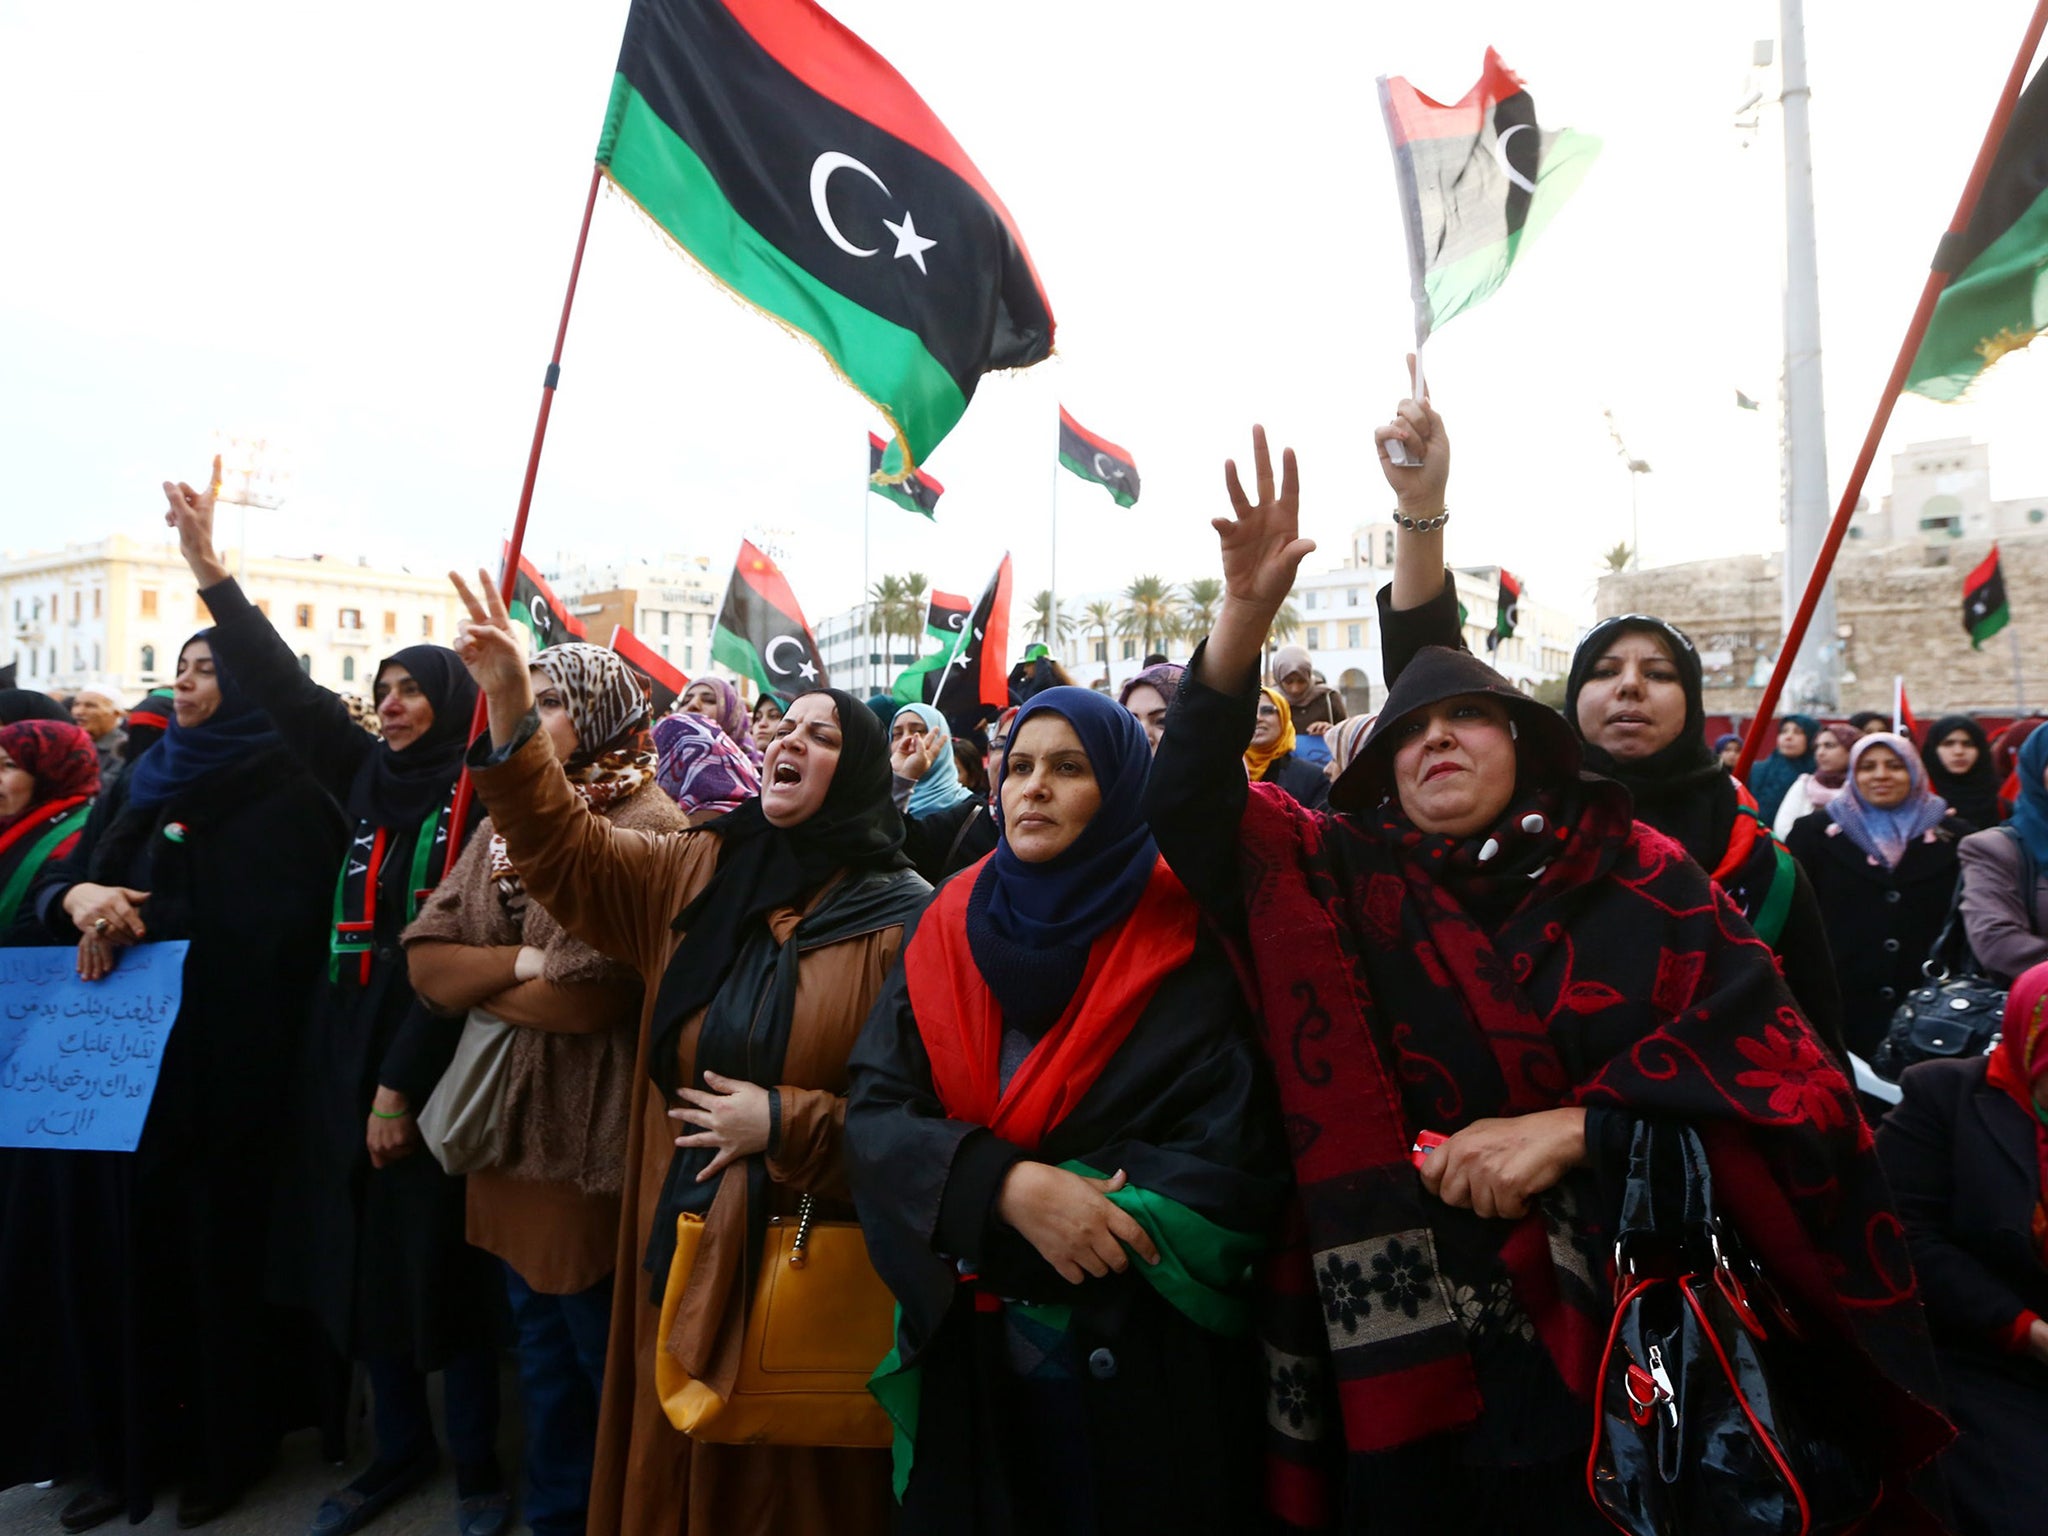 Violence and instability in Libya